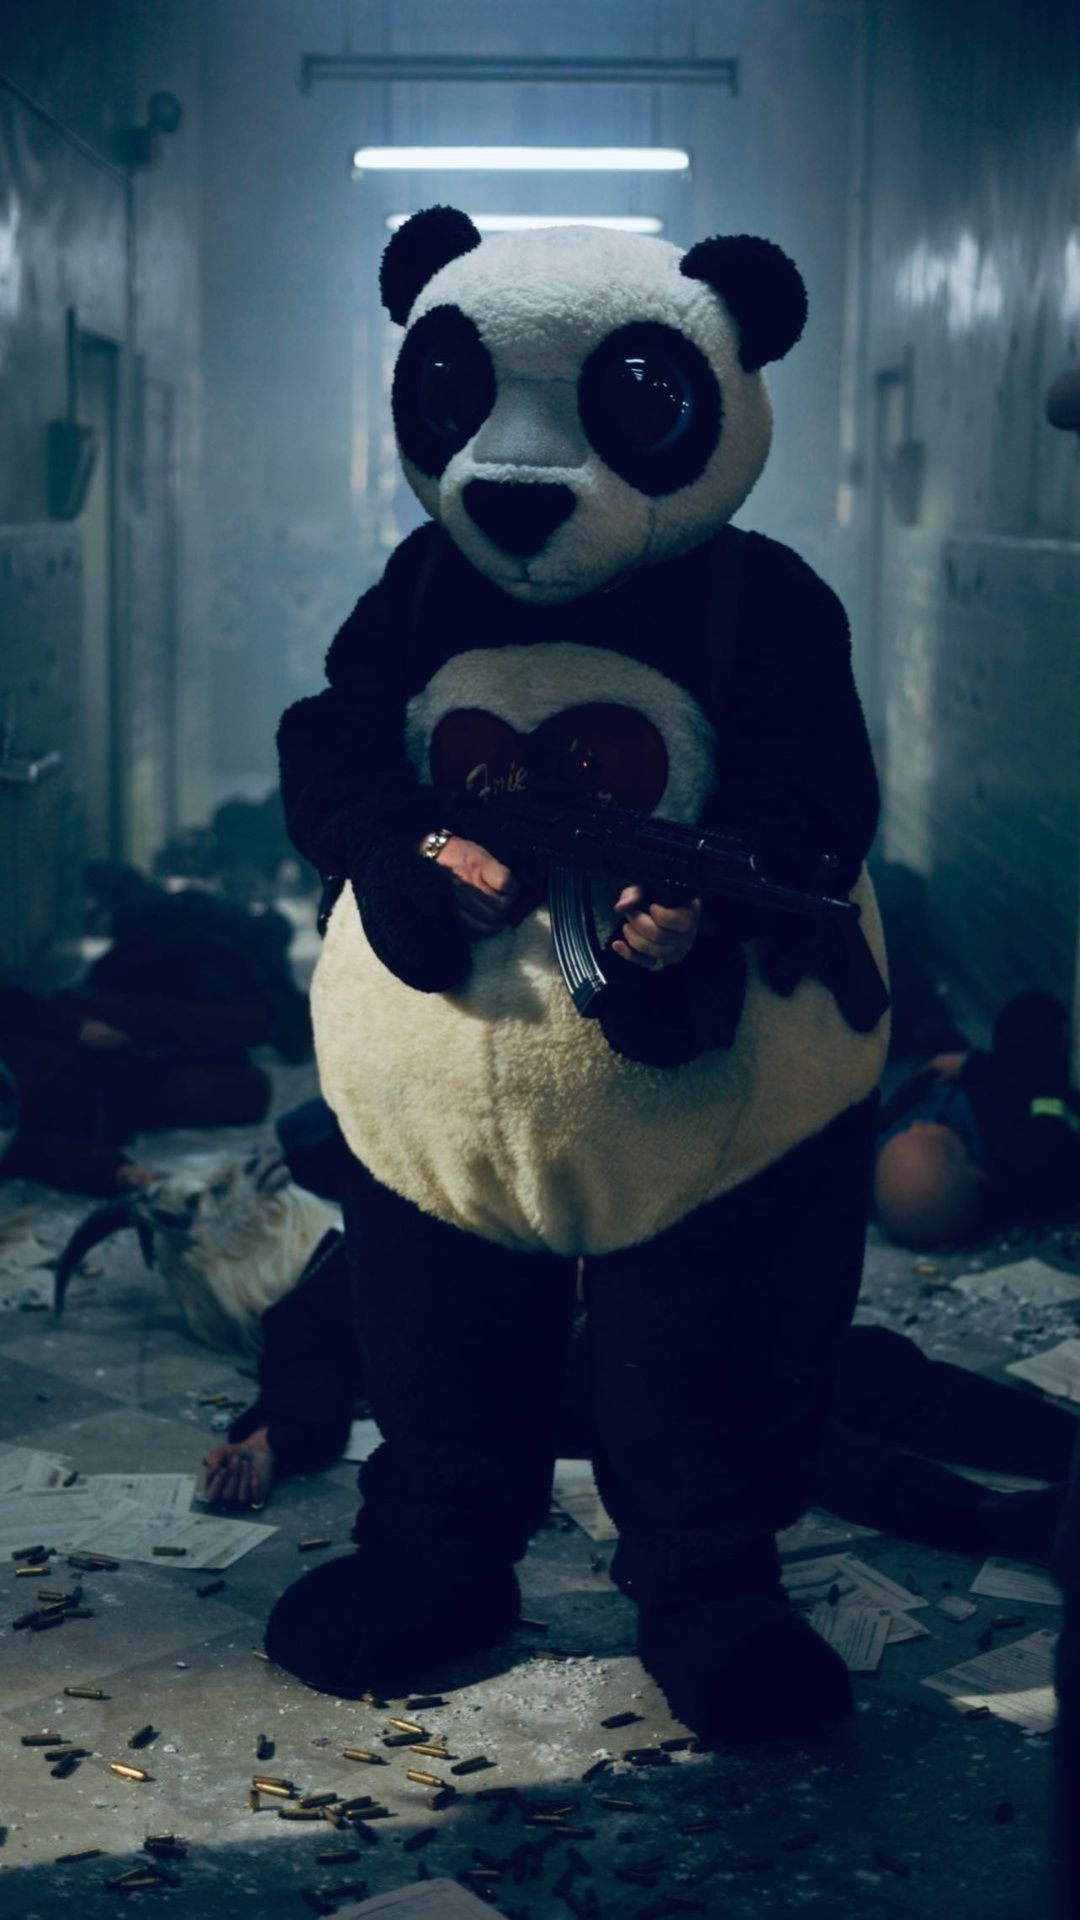 IPhone wallpaper with a photo of a person in a panda suit holding a gun in a room - Panda